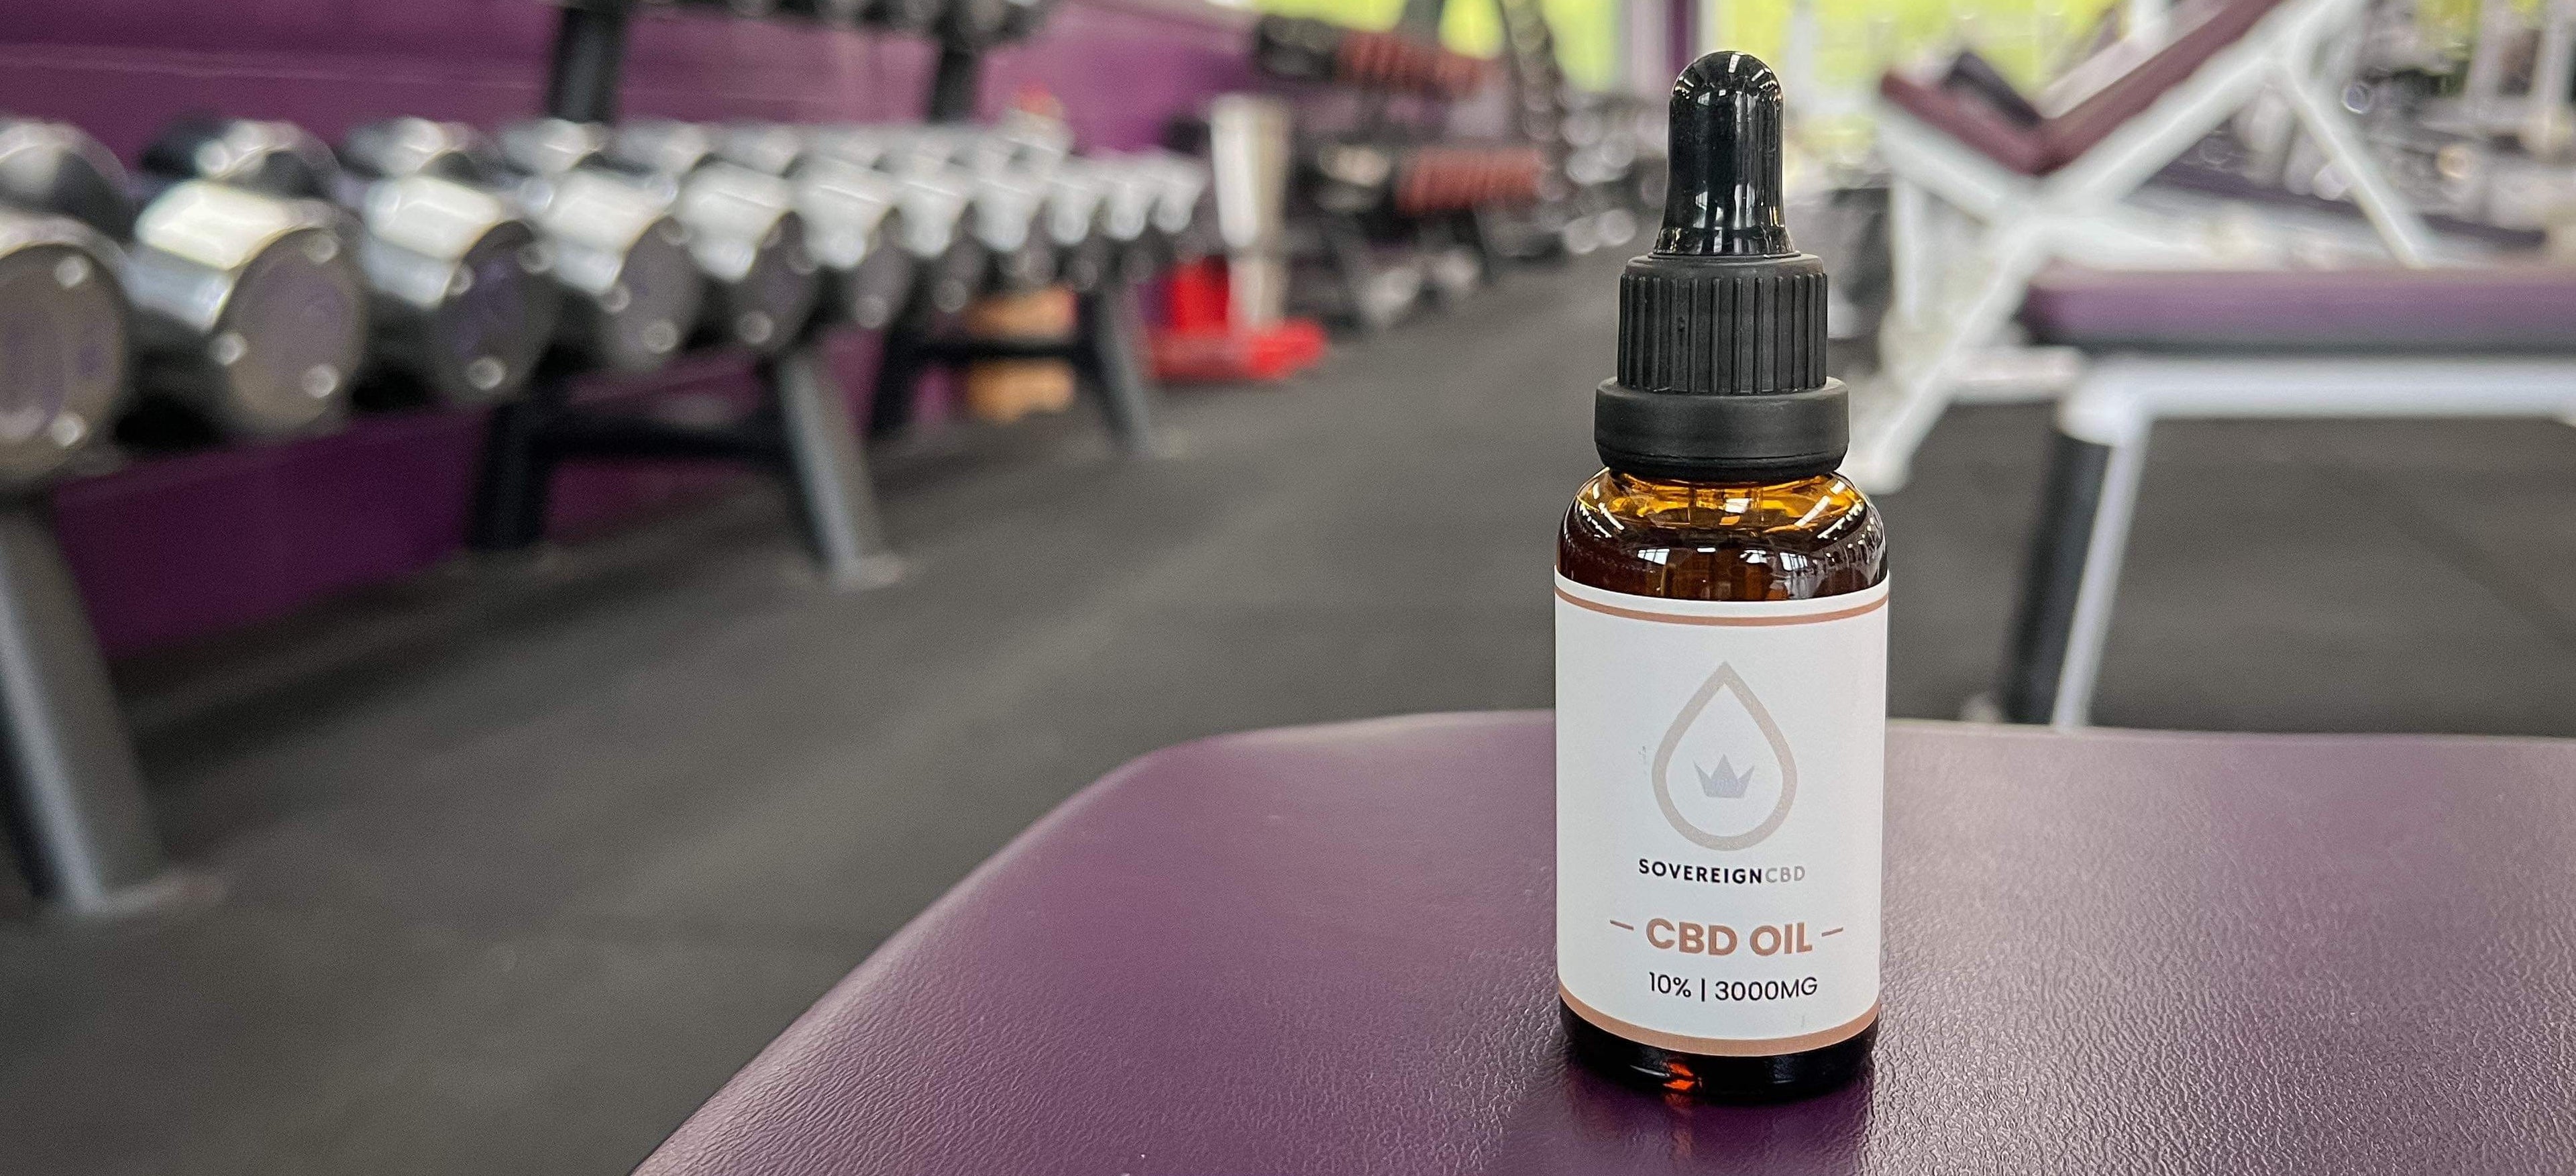 Premium CBD oil bottle with natural hemp extract, showcasing Sovereign Wellness's high-quality and lab-tested cannabidiol product for wellness and relaxation